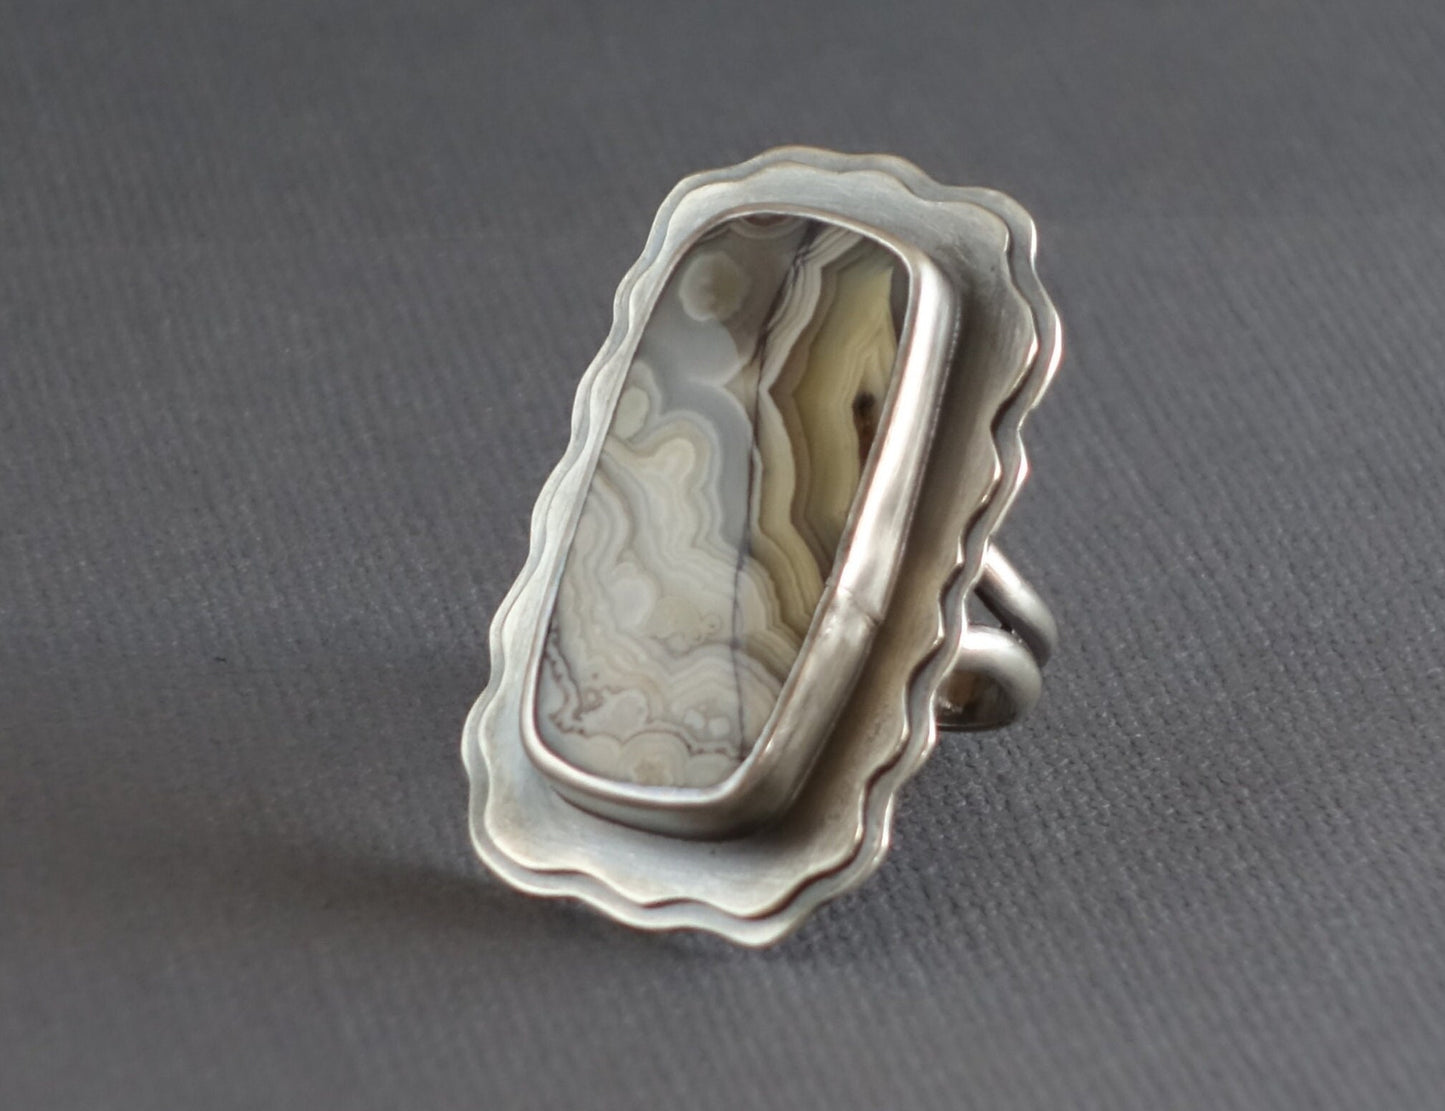 Big Agate Ring, Crazy Lace Agate Ring, Silver Agate Ring